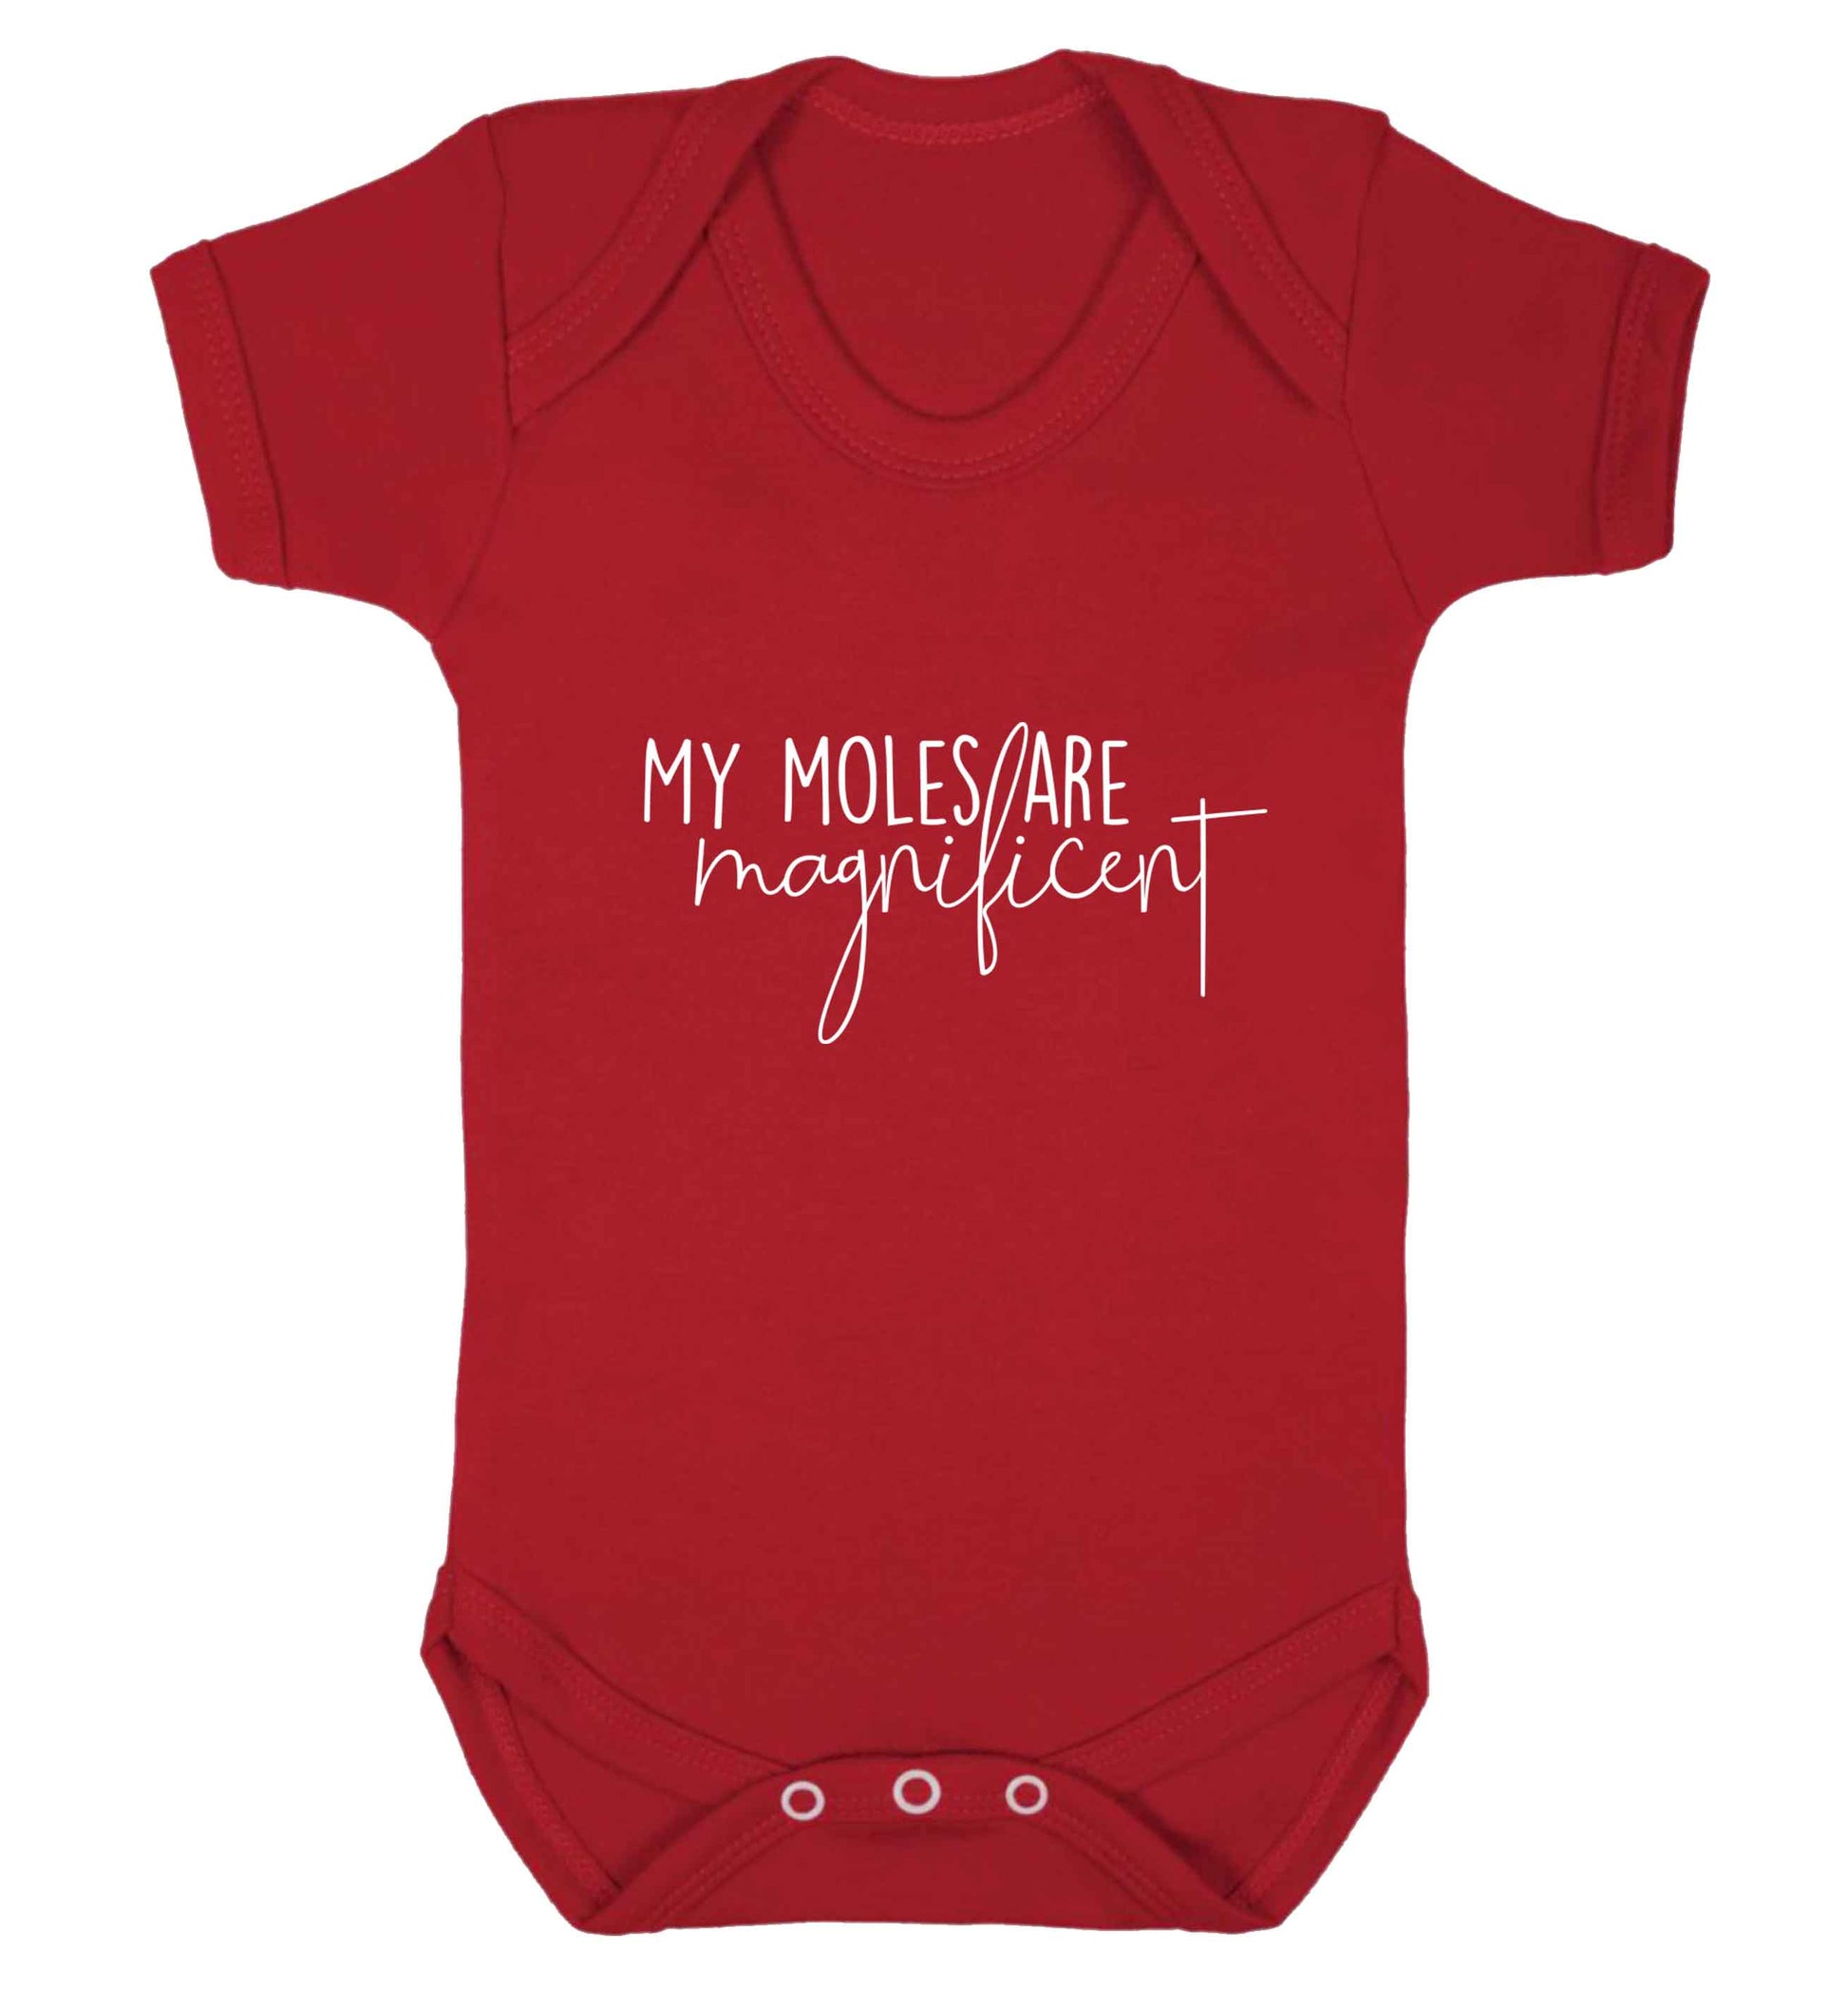 My moles are magnificent baby vest red 18-24 months